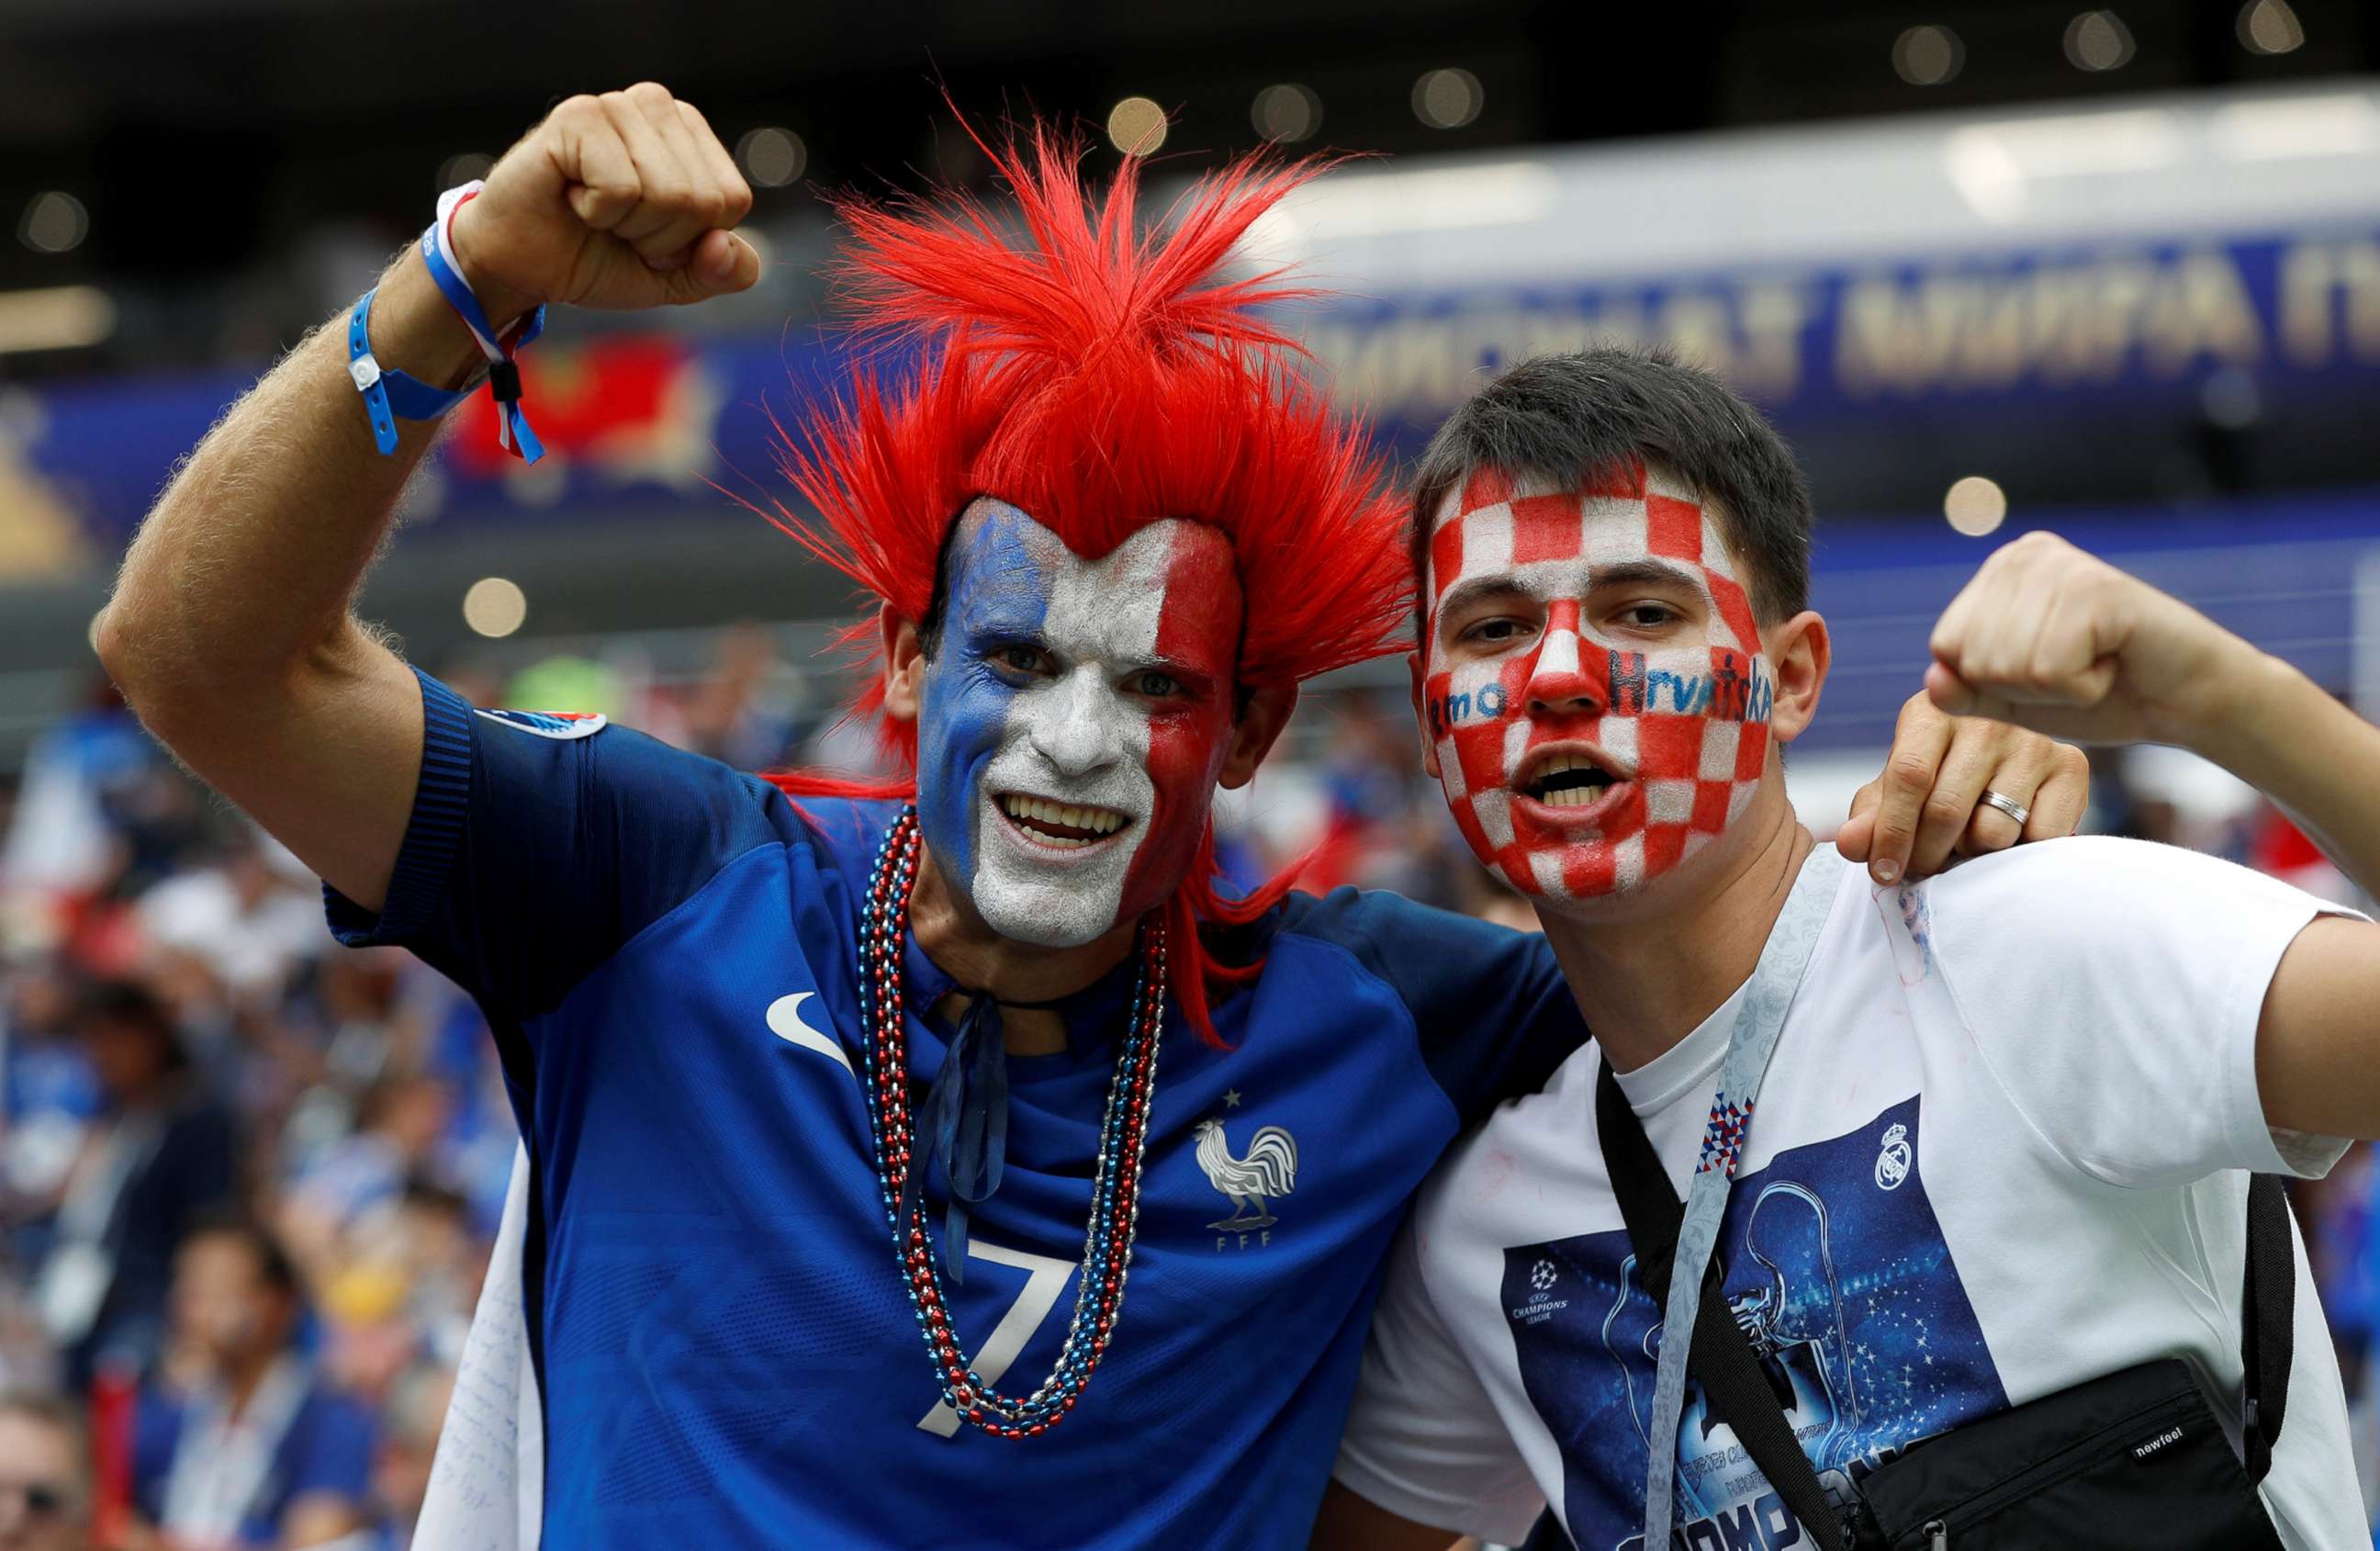 PHOTO: A France fan and a Croatia fan pose for a photo inside Luzhniki Stadium before the World Cup match in Moscow, July 15, 2018.